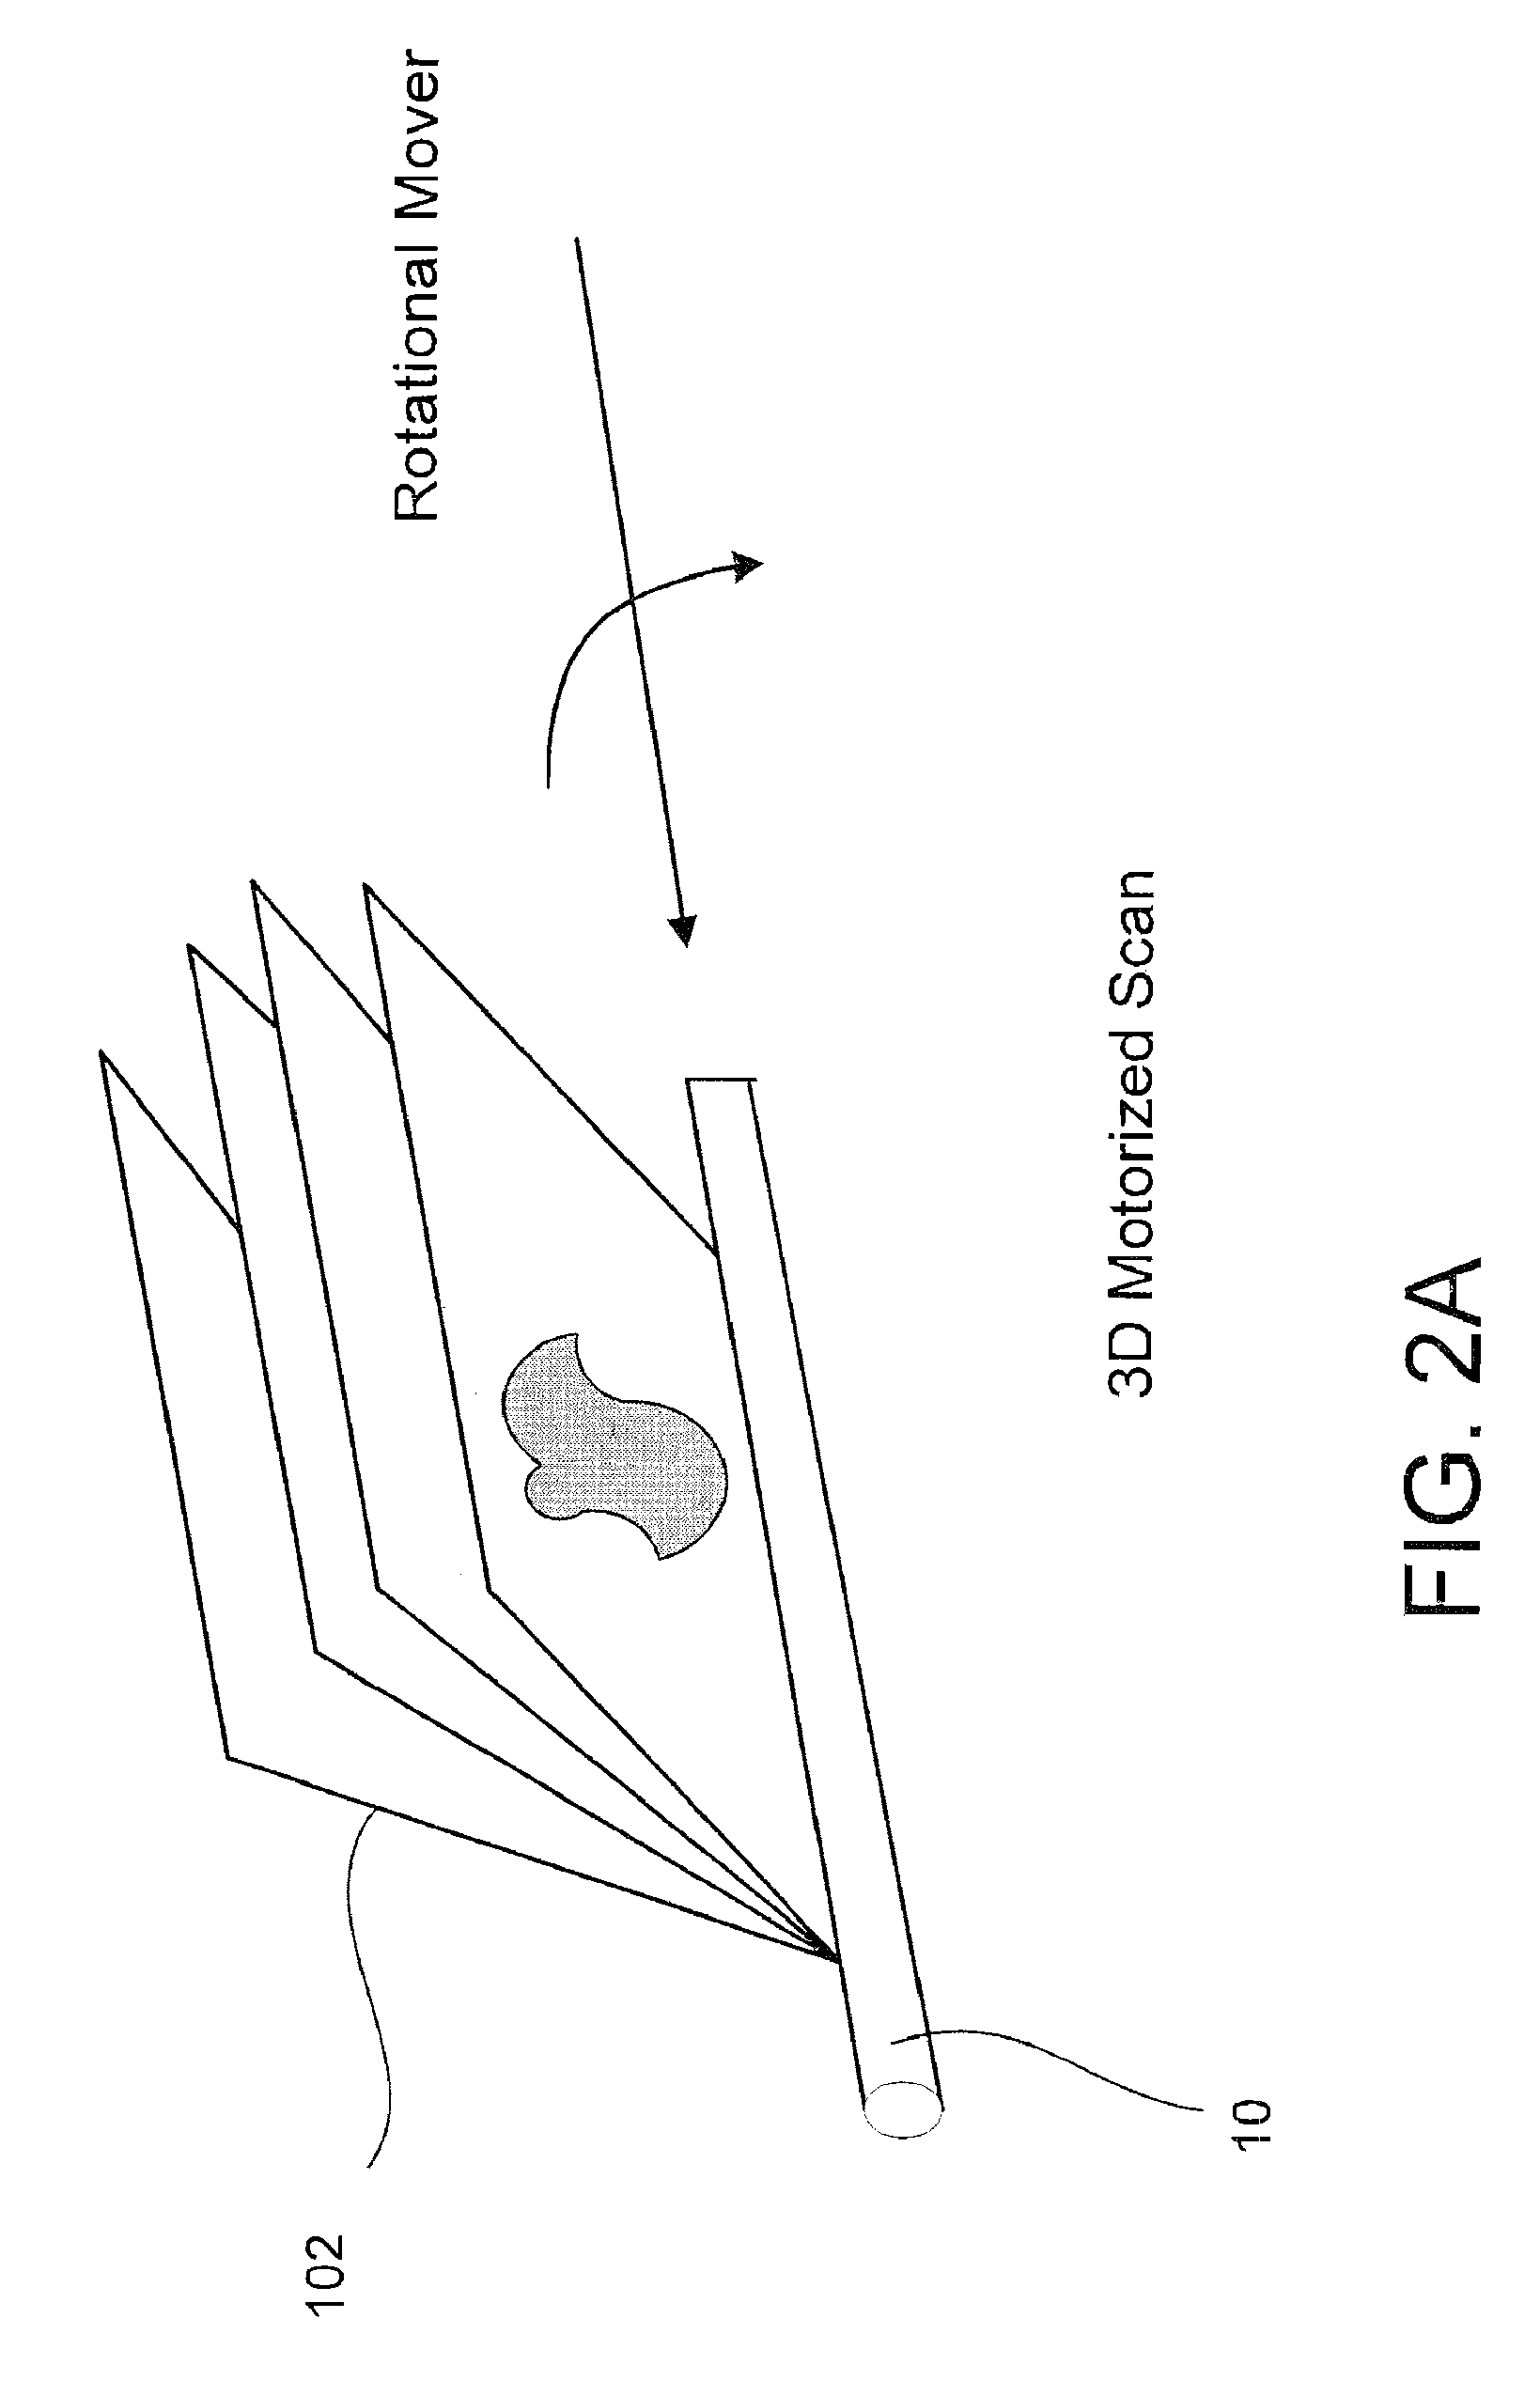 Object recognition system for medical imaging